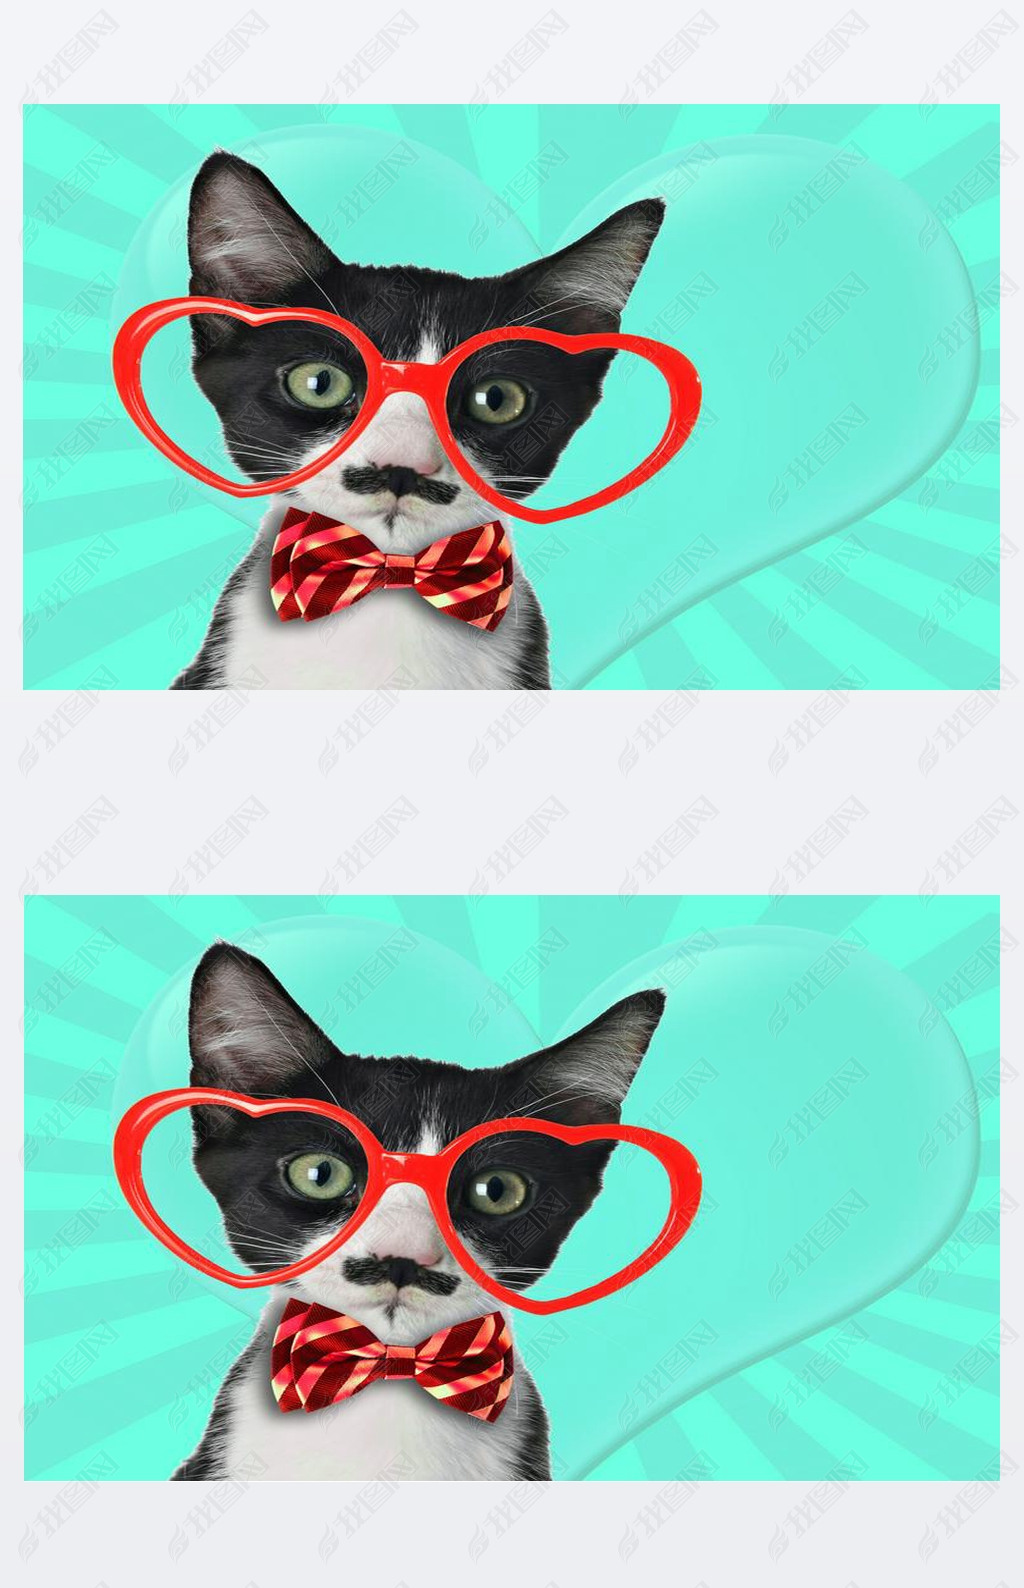 Cute black and white kitten with moustache and bow tie, wearing heart shaped eye glasses for Valenti